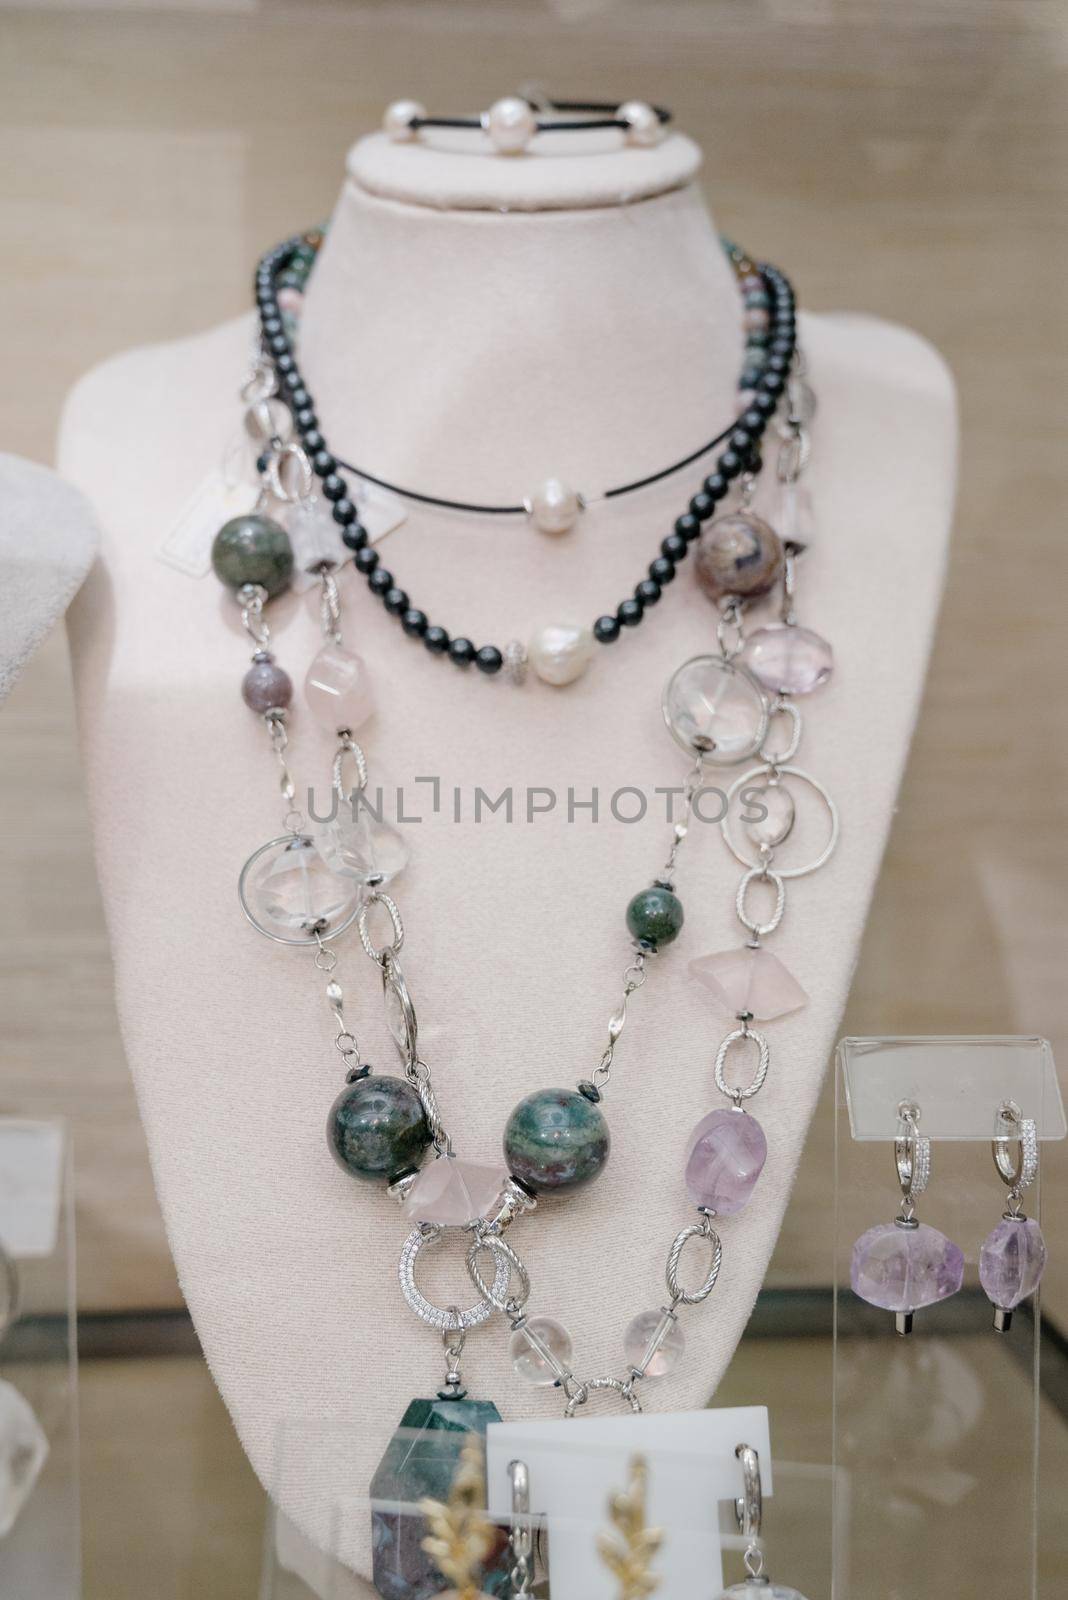 Shop window with necklaces and jewelry. Custome jewelry on display by Kovenkin